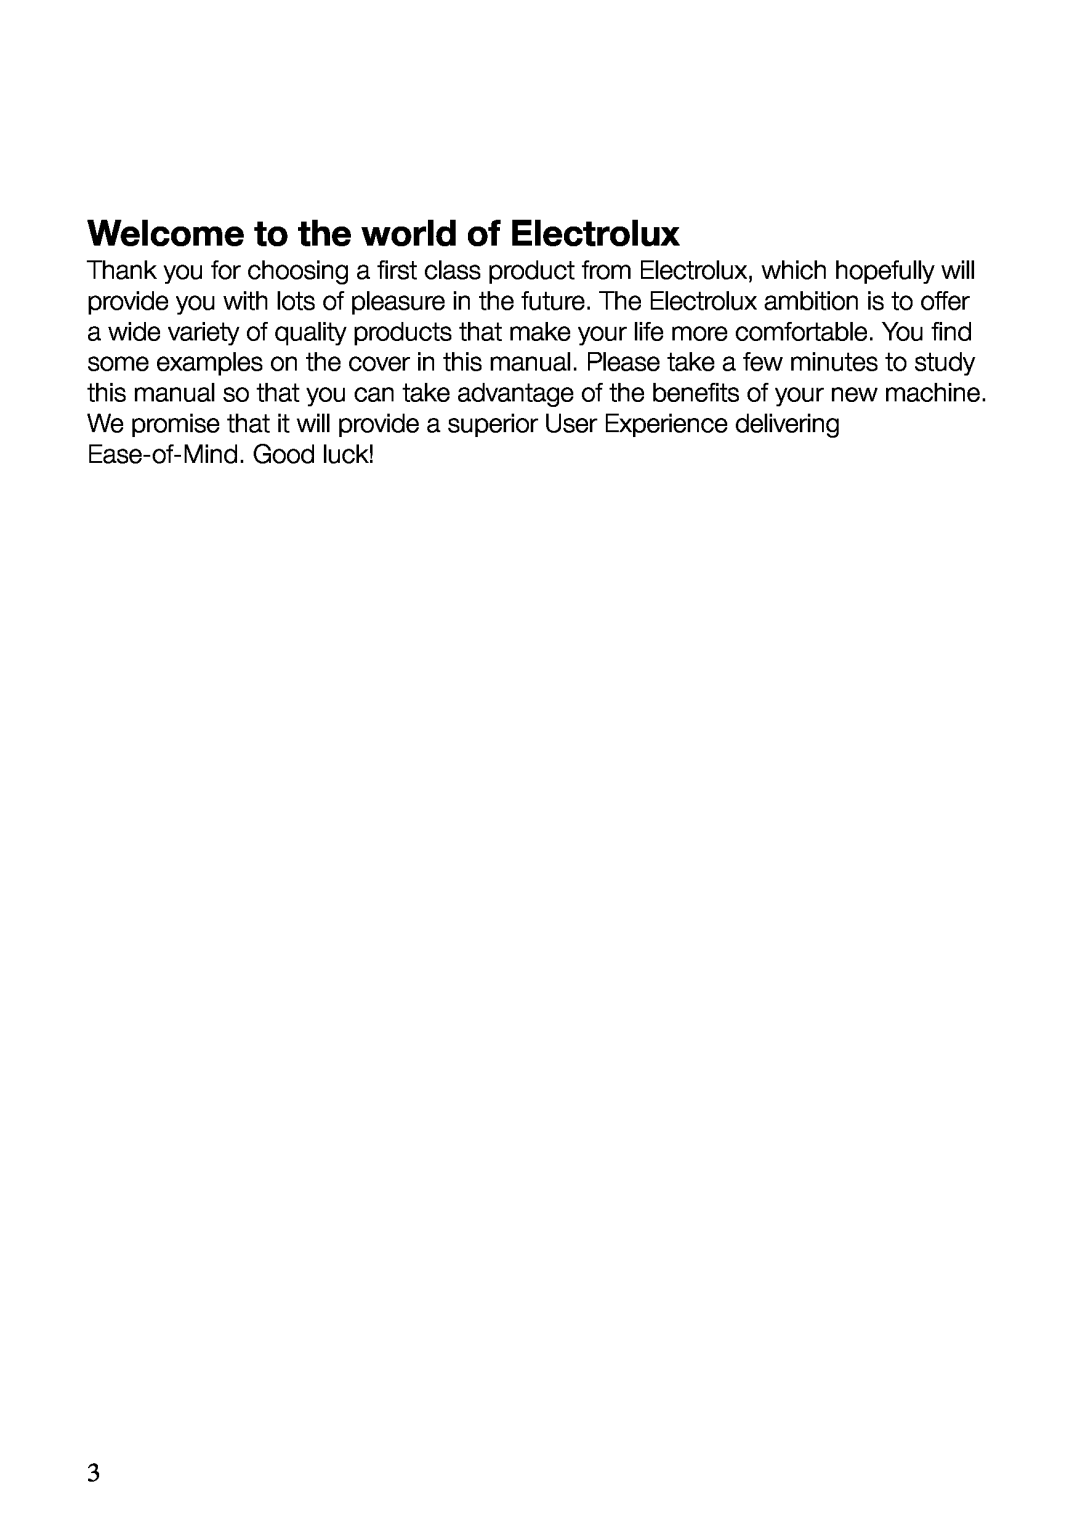 Electrolux ERF37800WX user manual Welcome to the world of Electrolux 